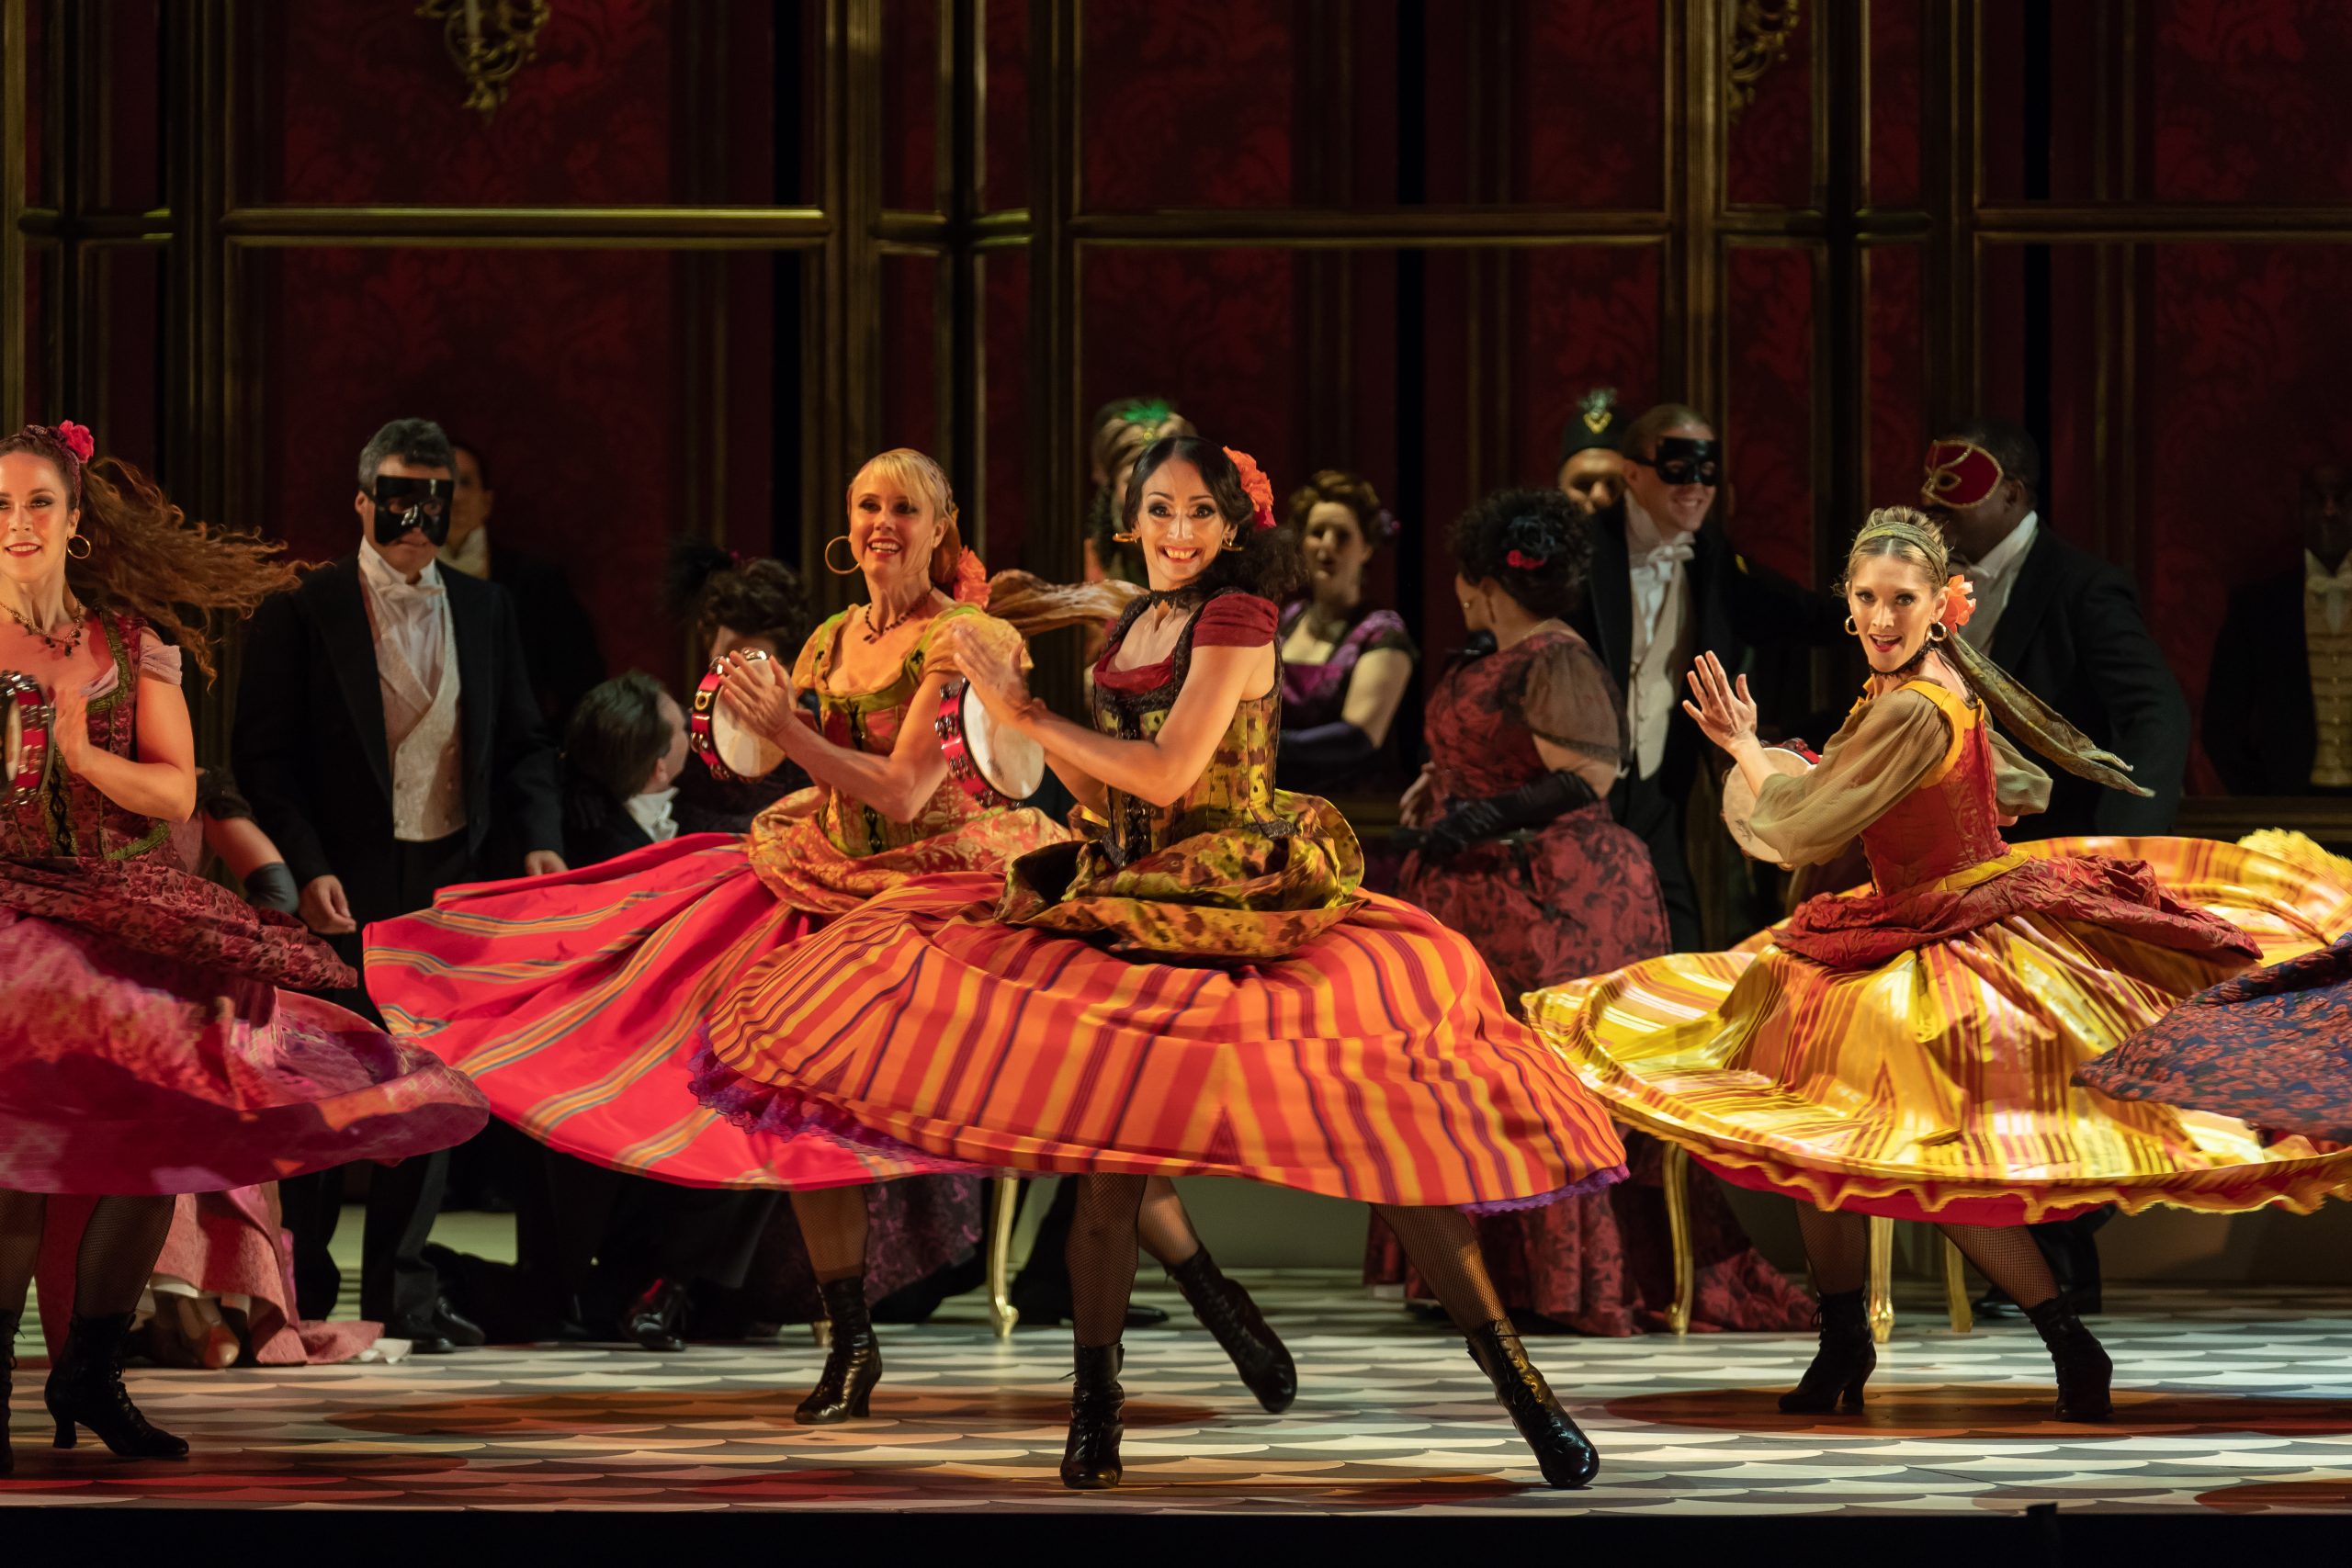 stage image of la traviata. women in colorful skirts dance